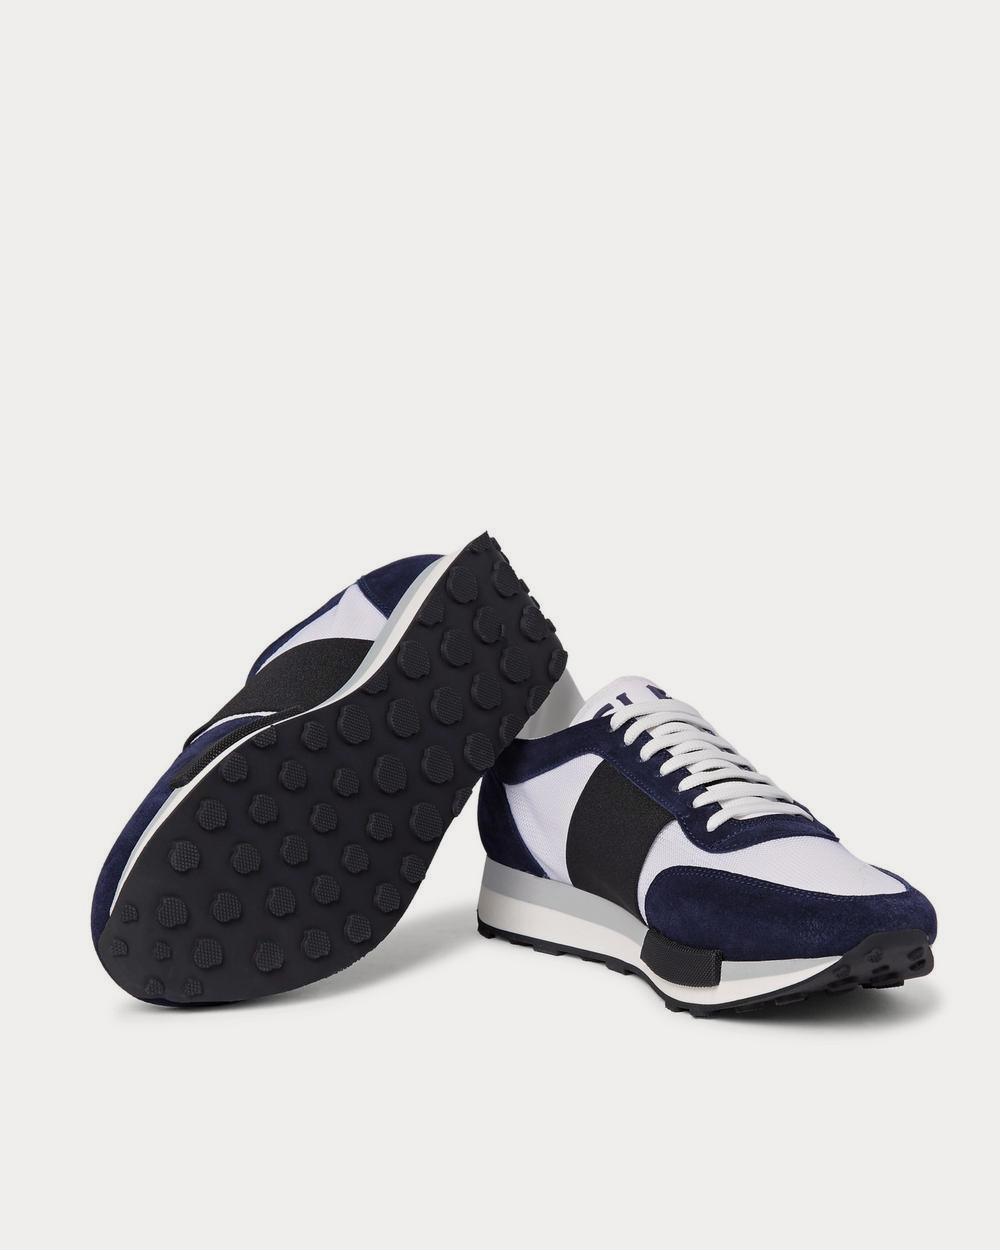 Moncler - Horace Suede and Mesh  Navy low top sneakers